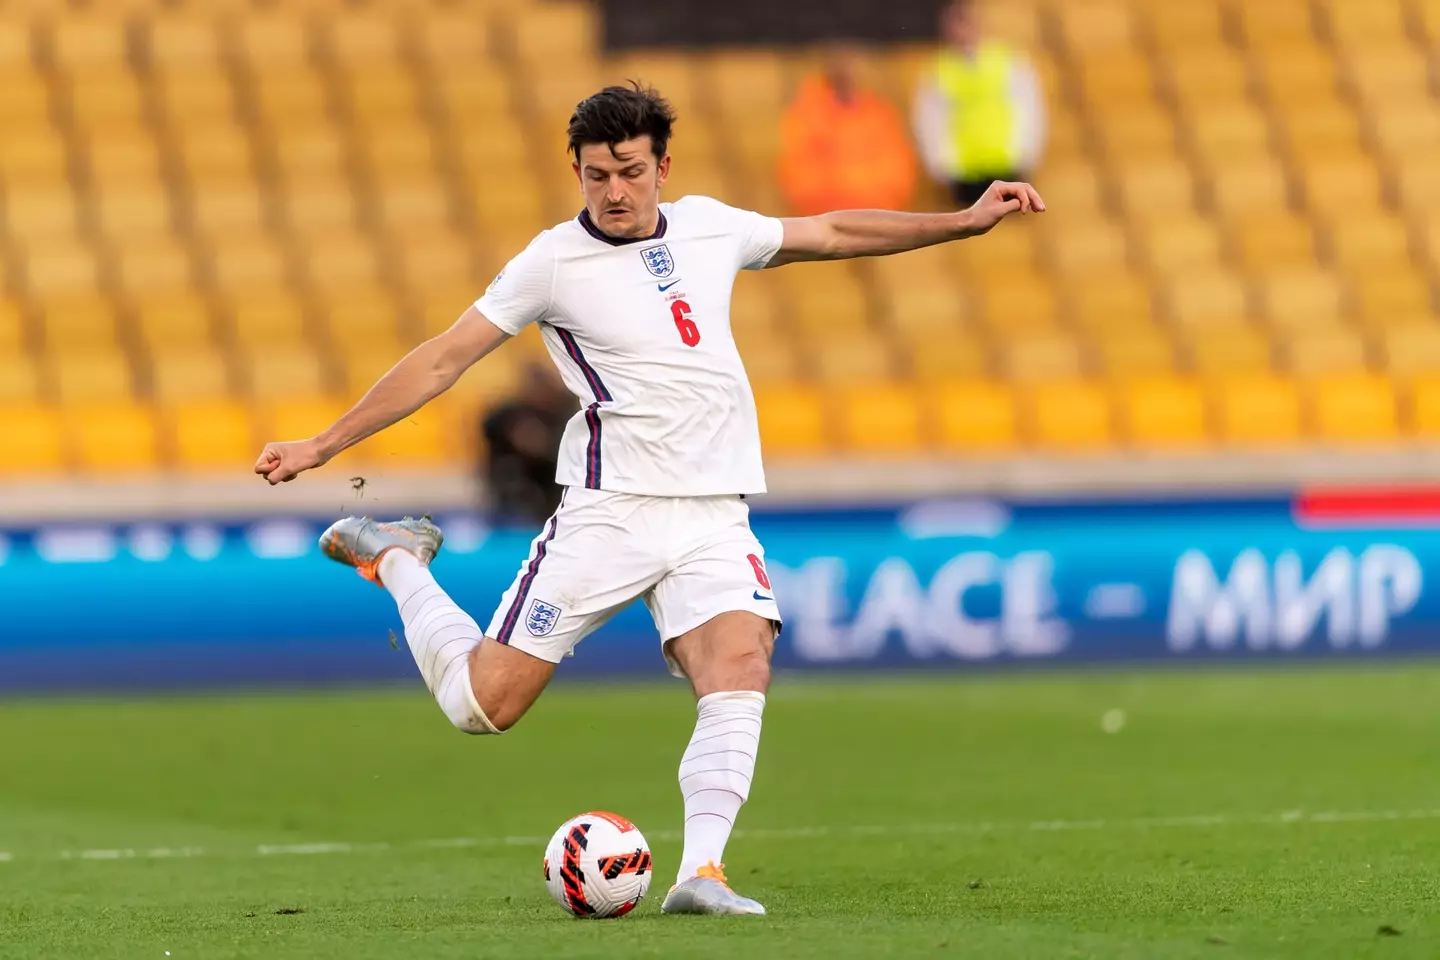 It has often been mentioned that Harry Maguire at a more consistent level for England than for Manchester United. (Alany)